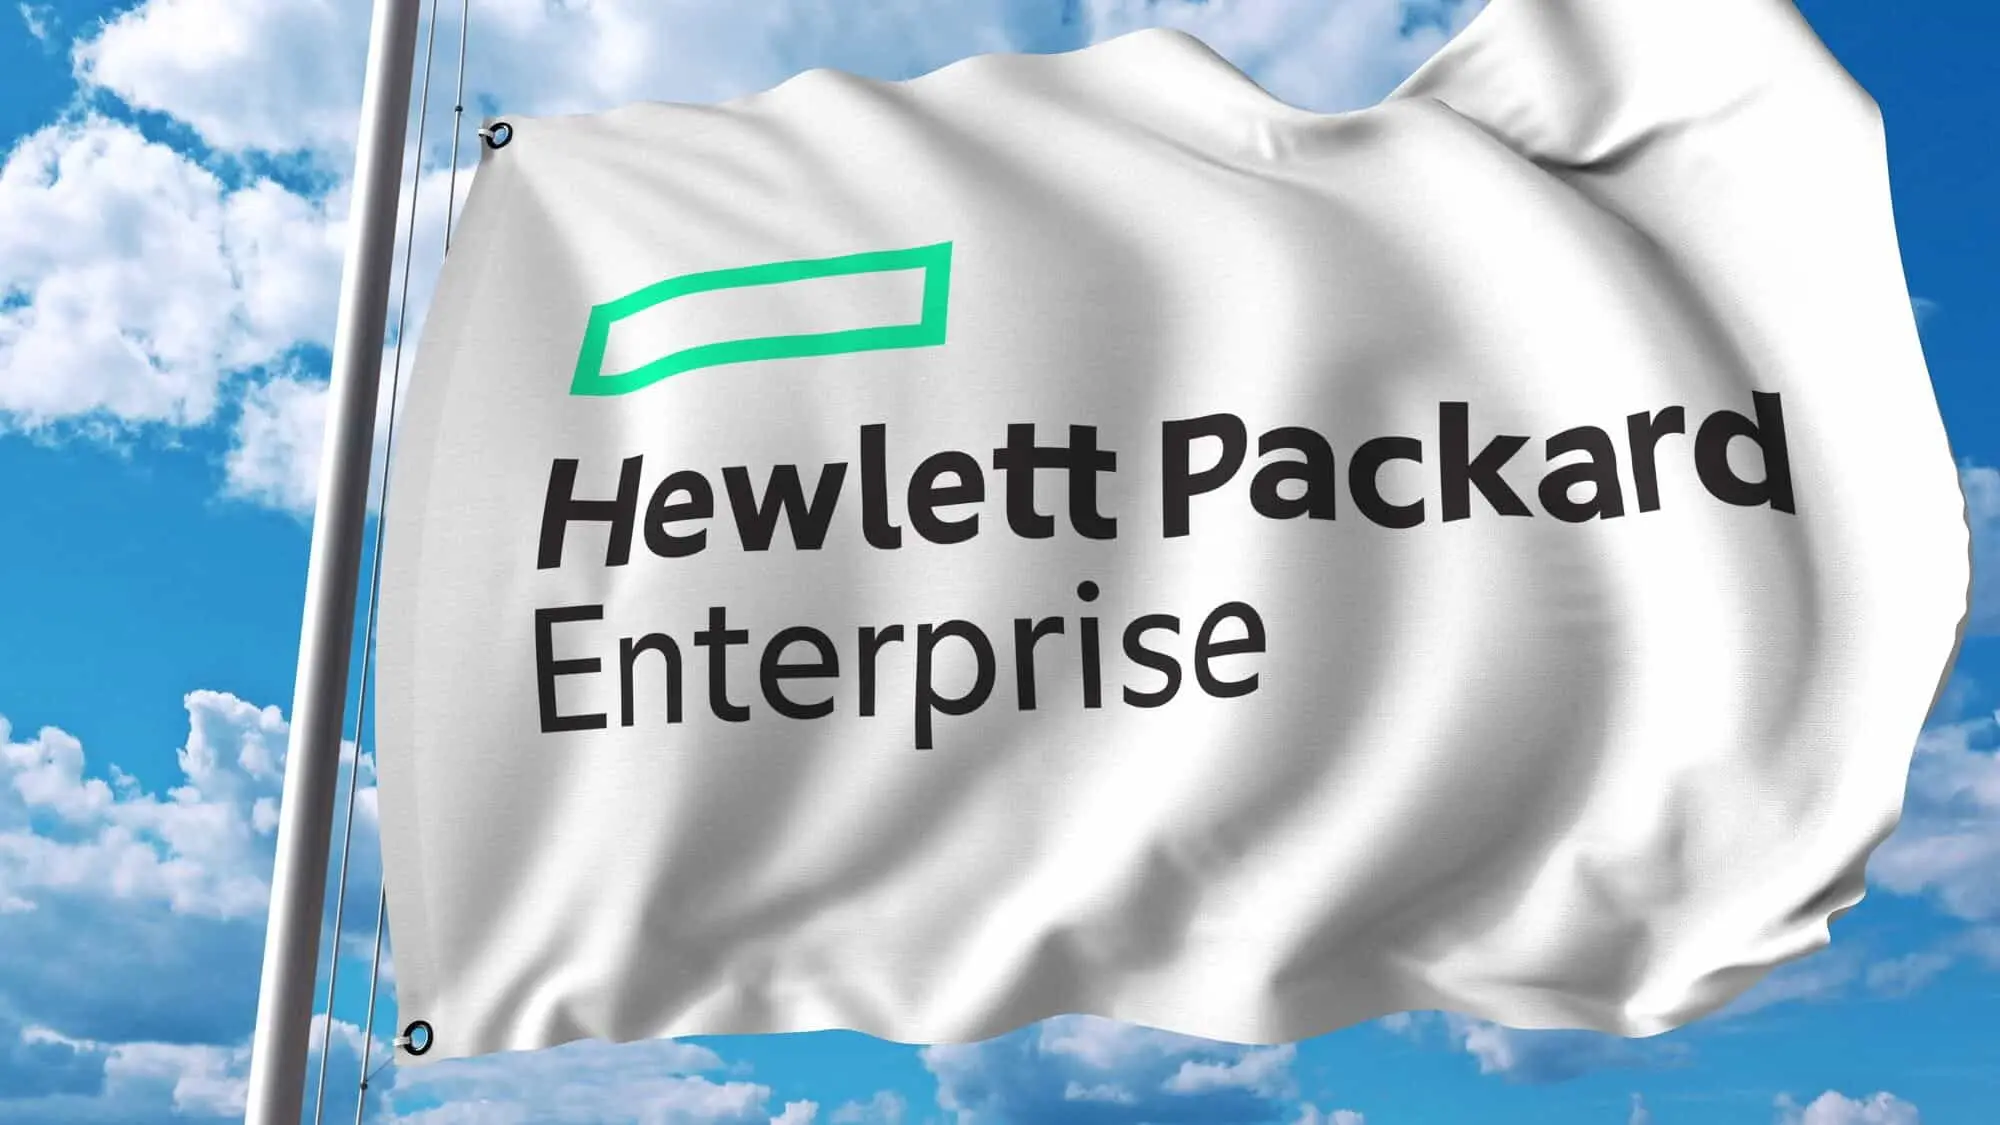 hewlett packard enterprise enterprise account manager salary - What is the salary of Technical Account Manager in HPE